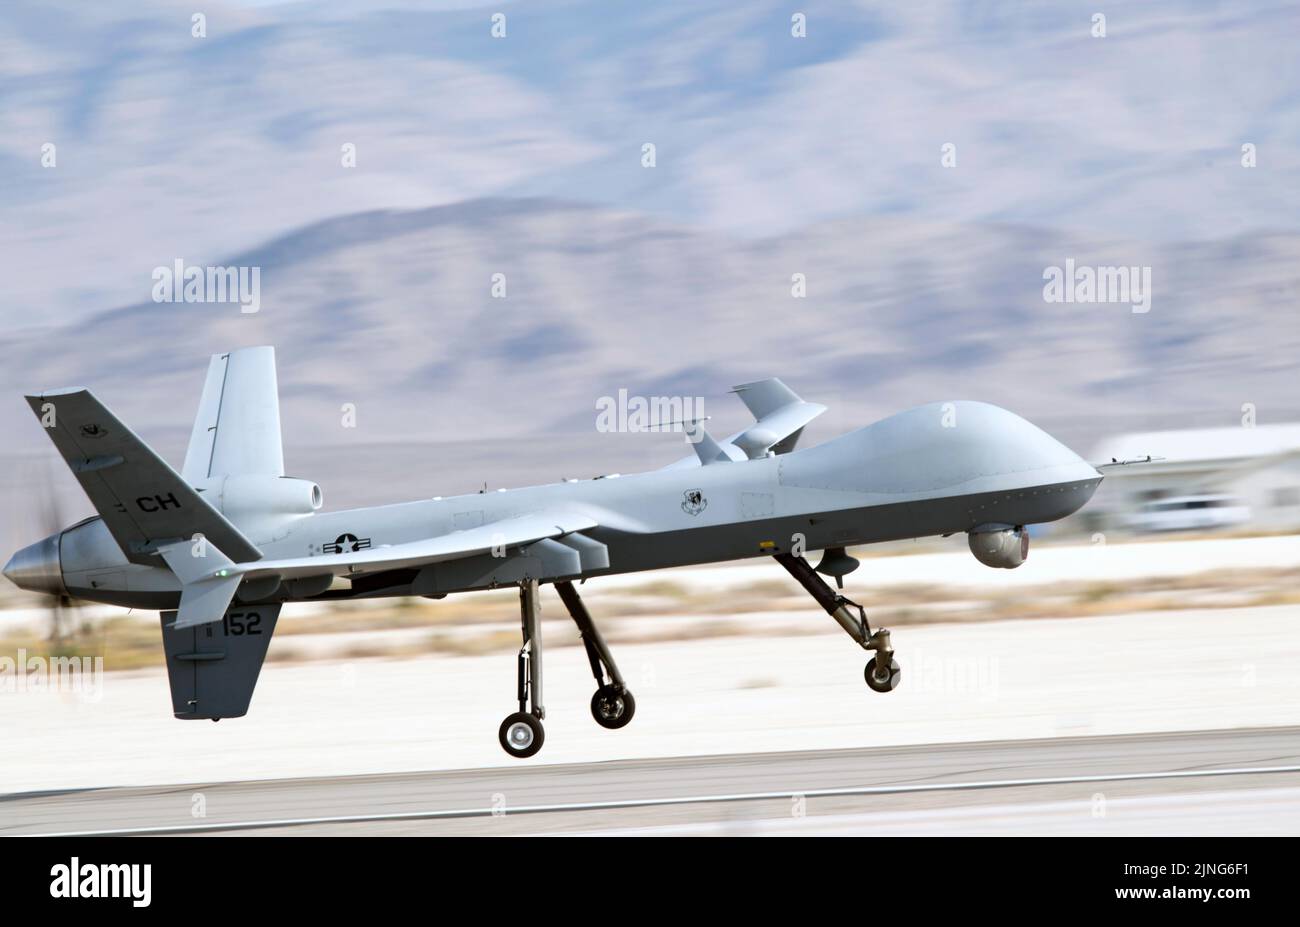 A U.S. Air Force MQ-9 Reaper drone assigned to the 432nd Air Expeditionary Wing, takes off from Creech Air Force Base, September 1, 2021 in Indian Springs, Nevada. Credit: Planetpix/Alamy Live News Stock Photo